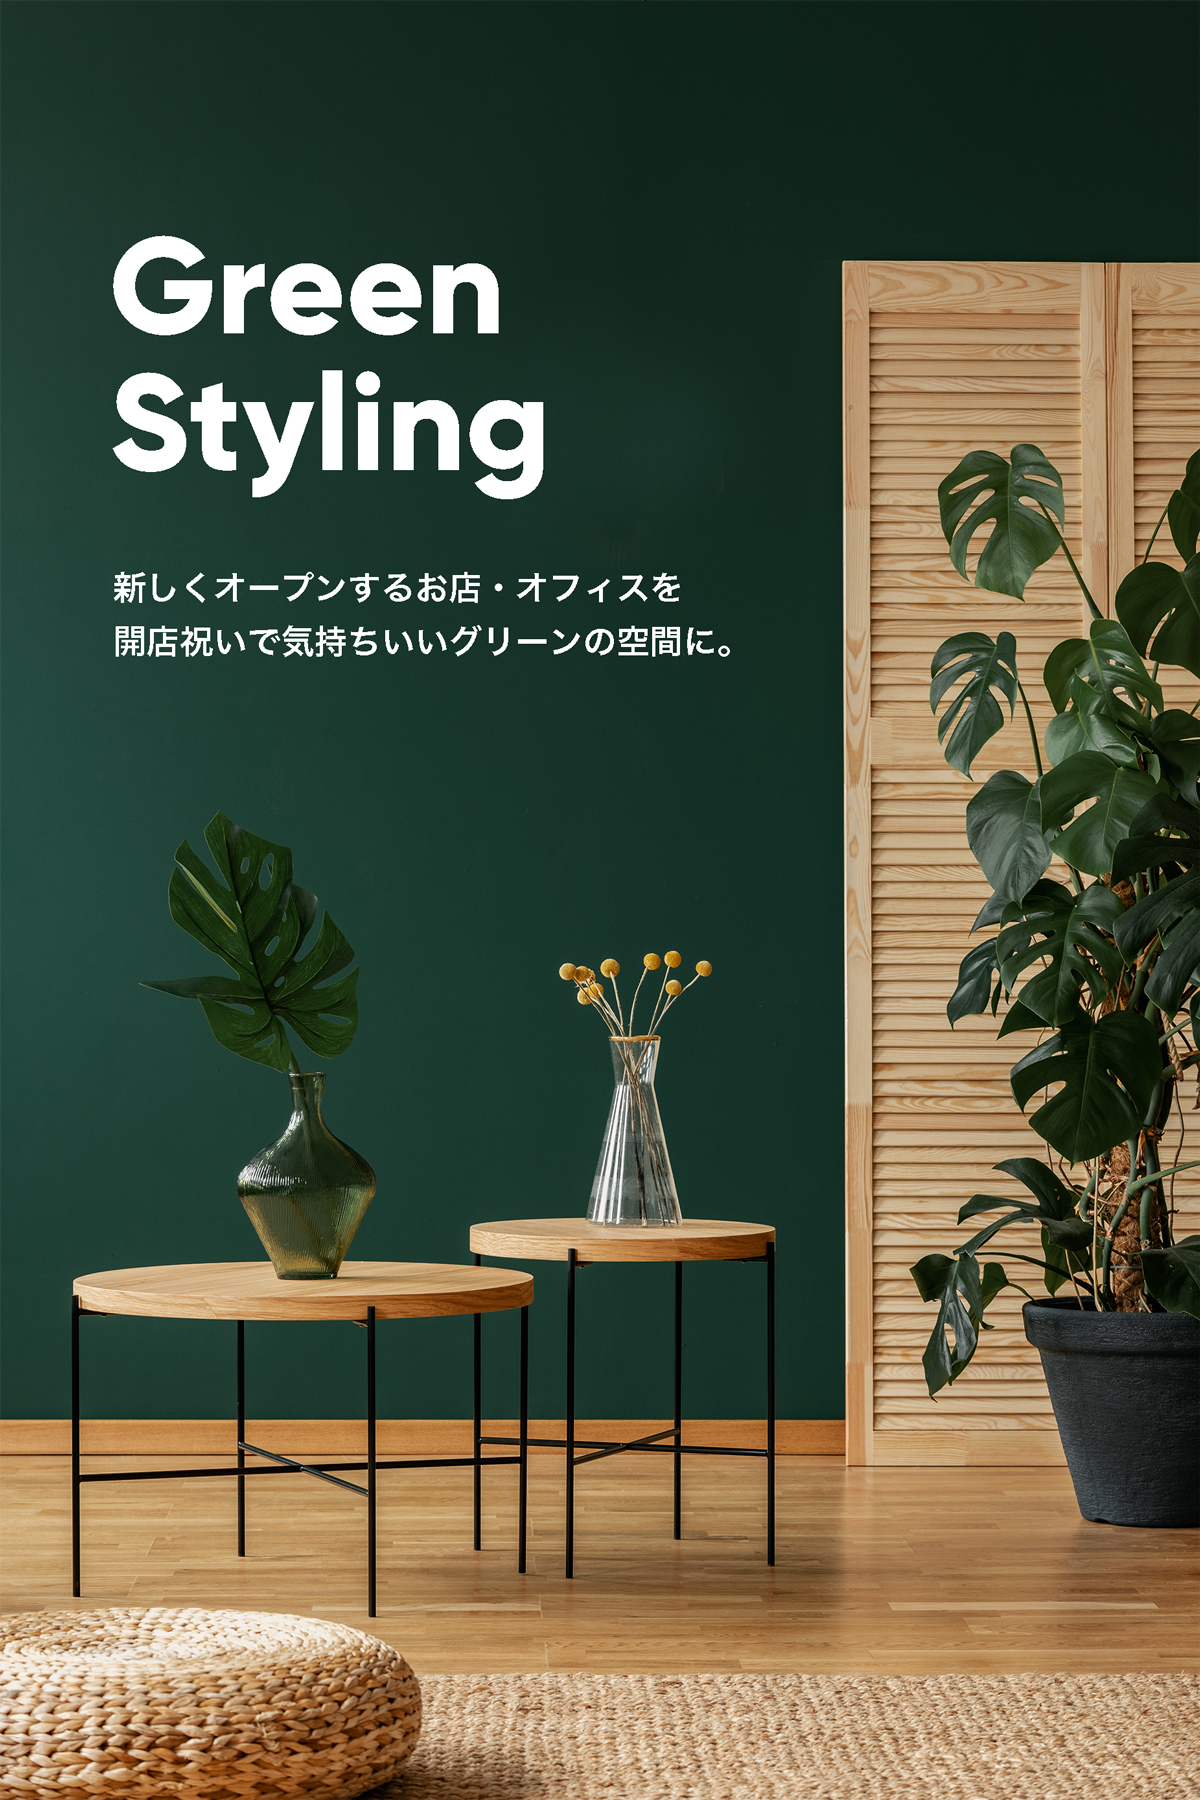 Green styling